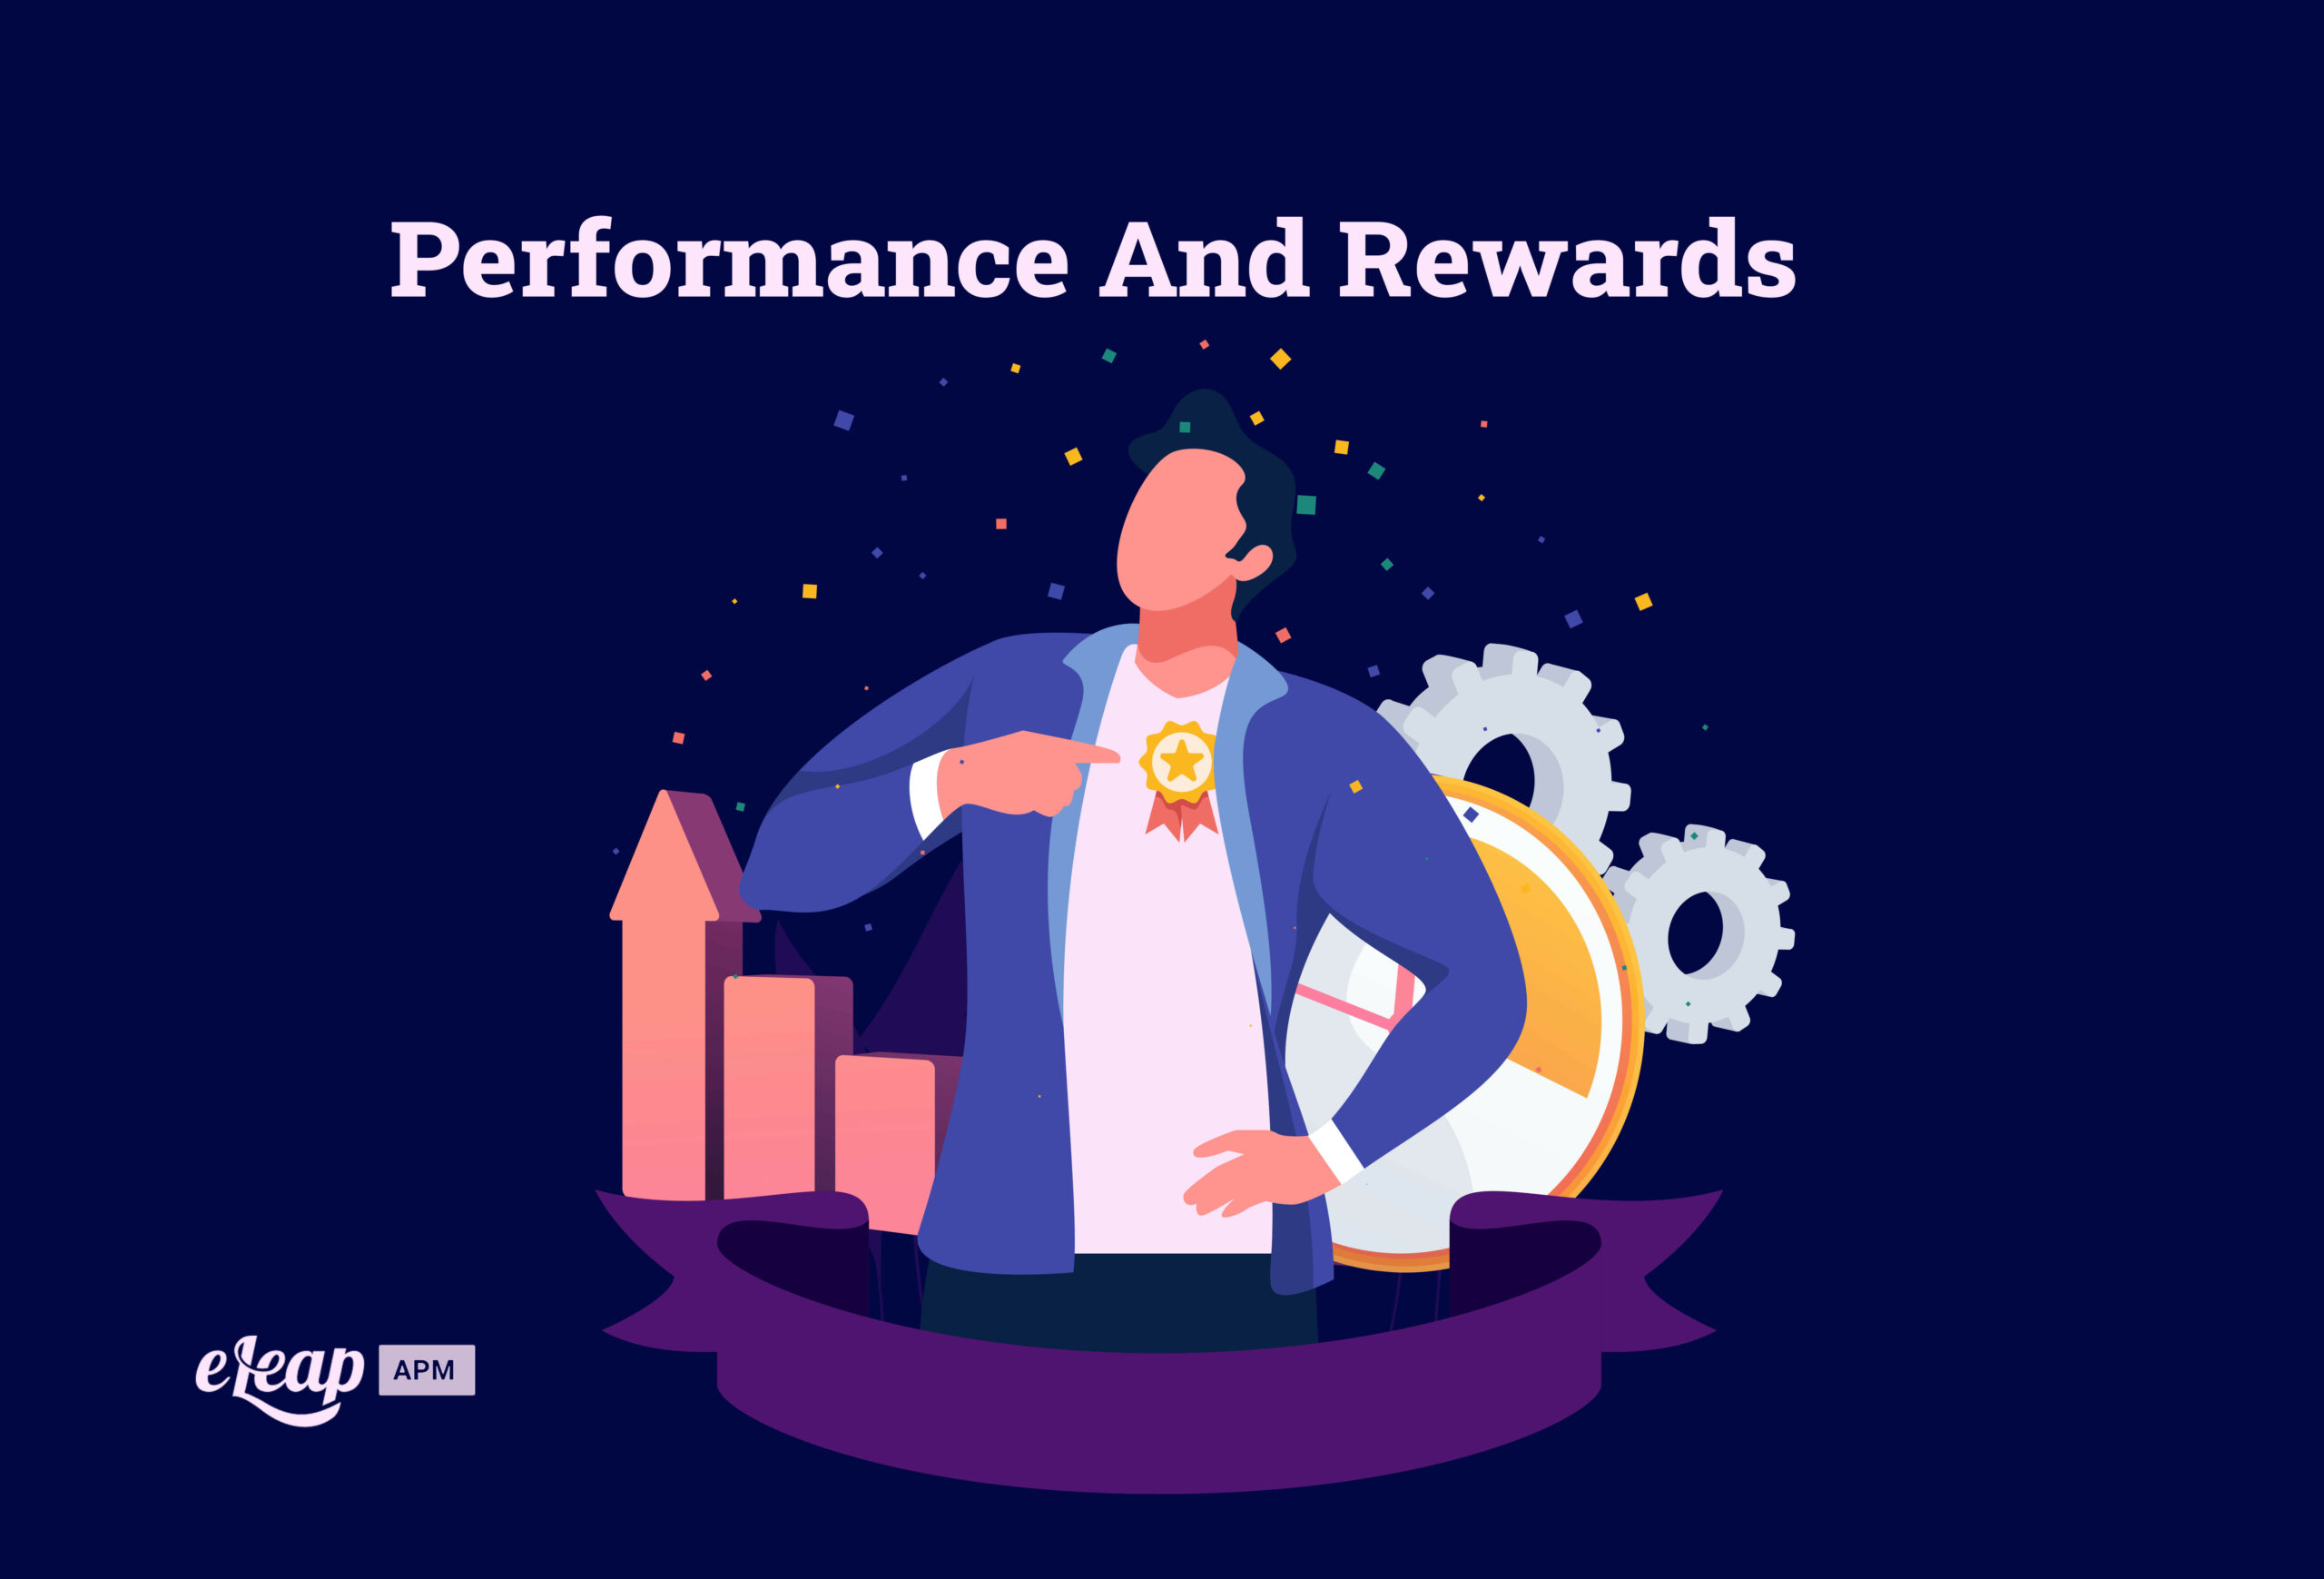 Performance and Rewards